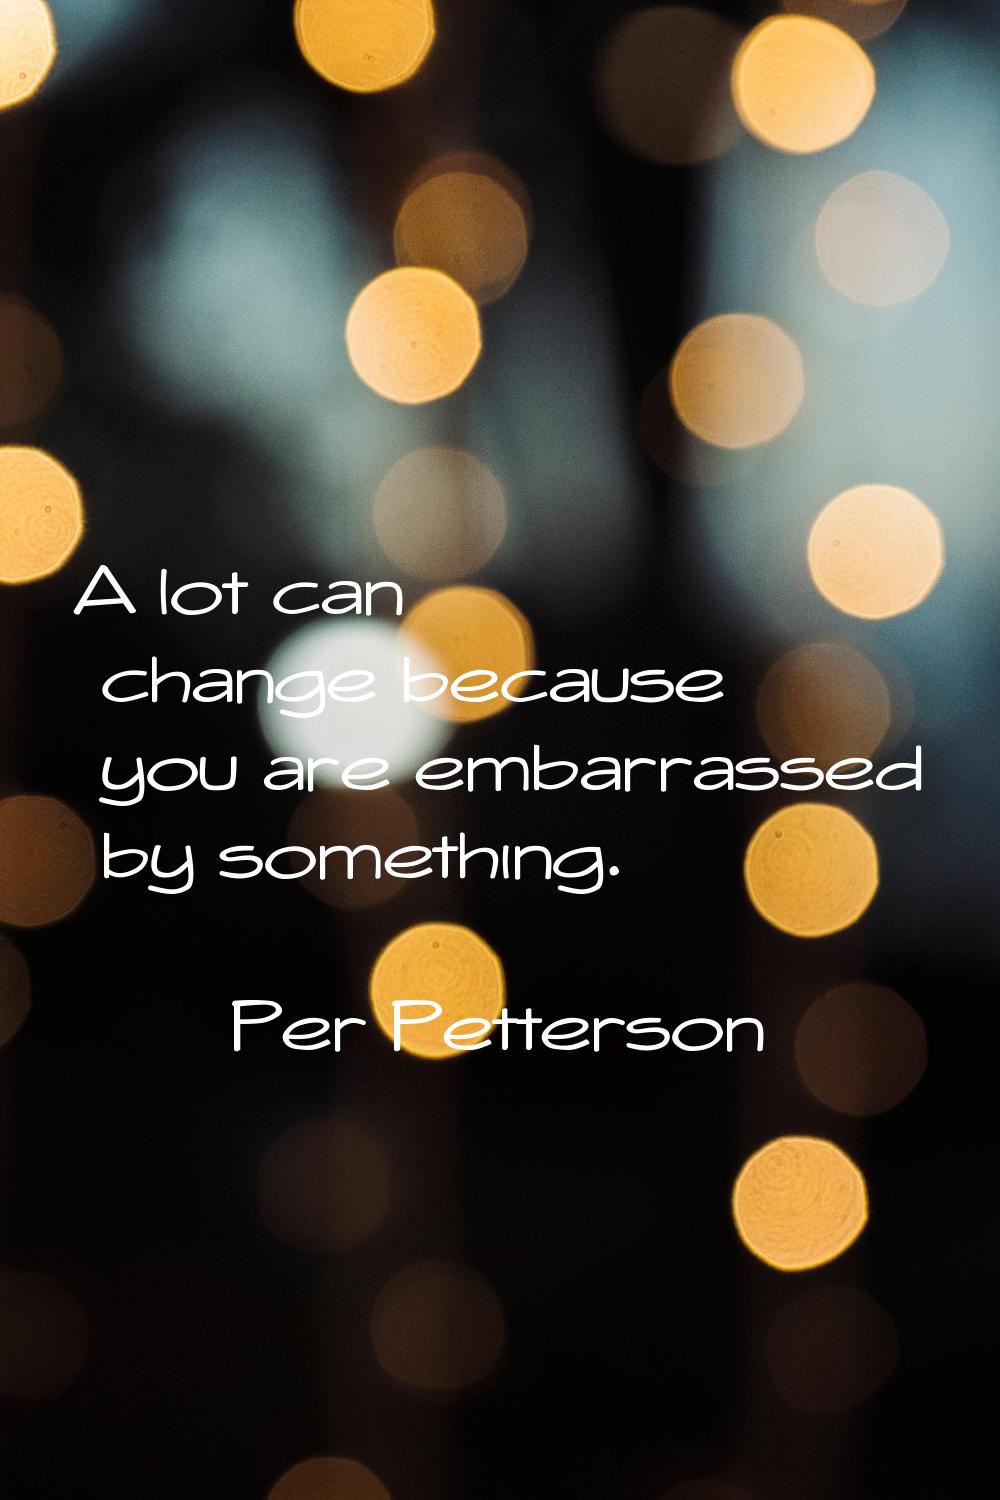 A lot can change because you are embarrassed by something.